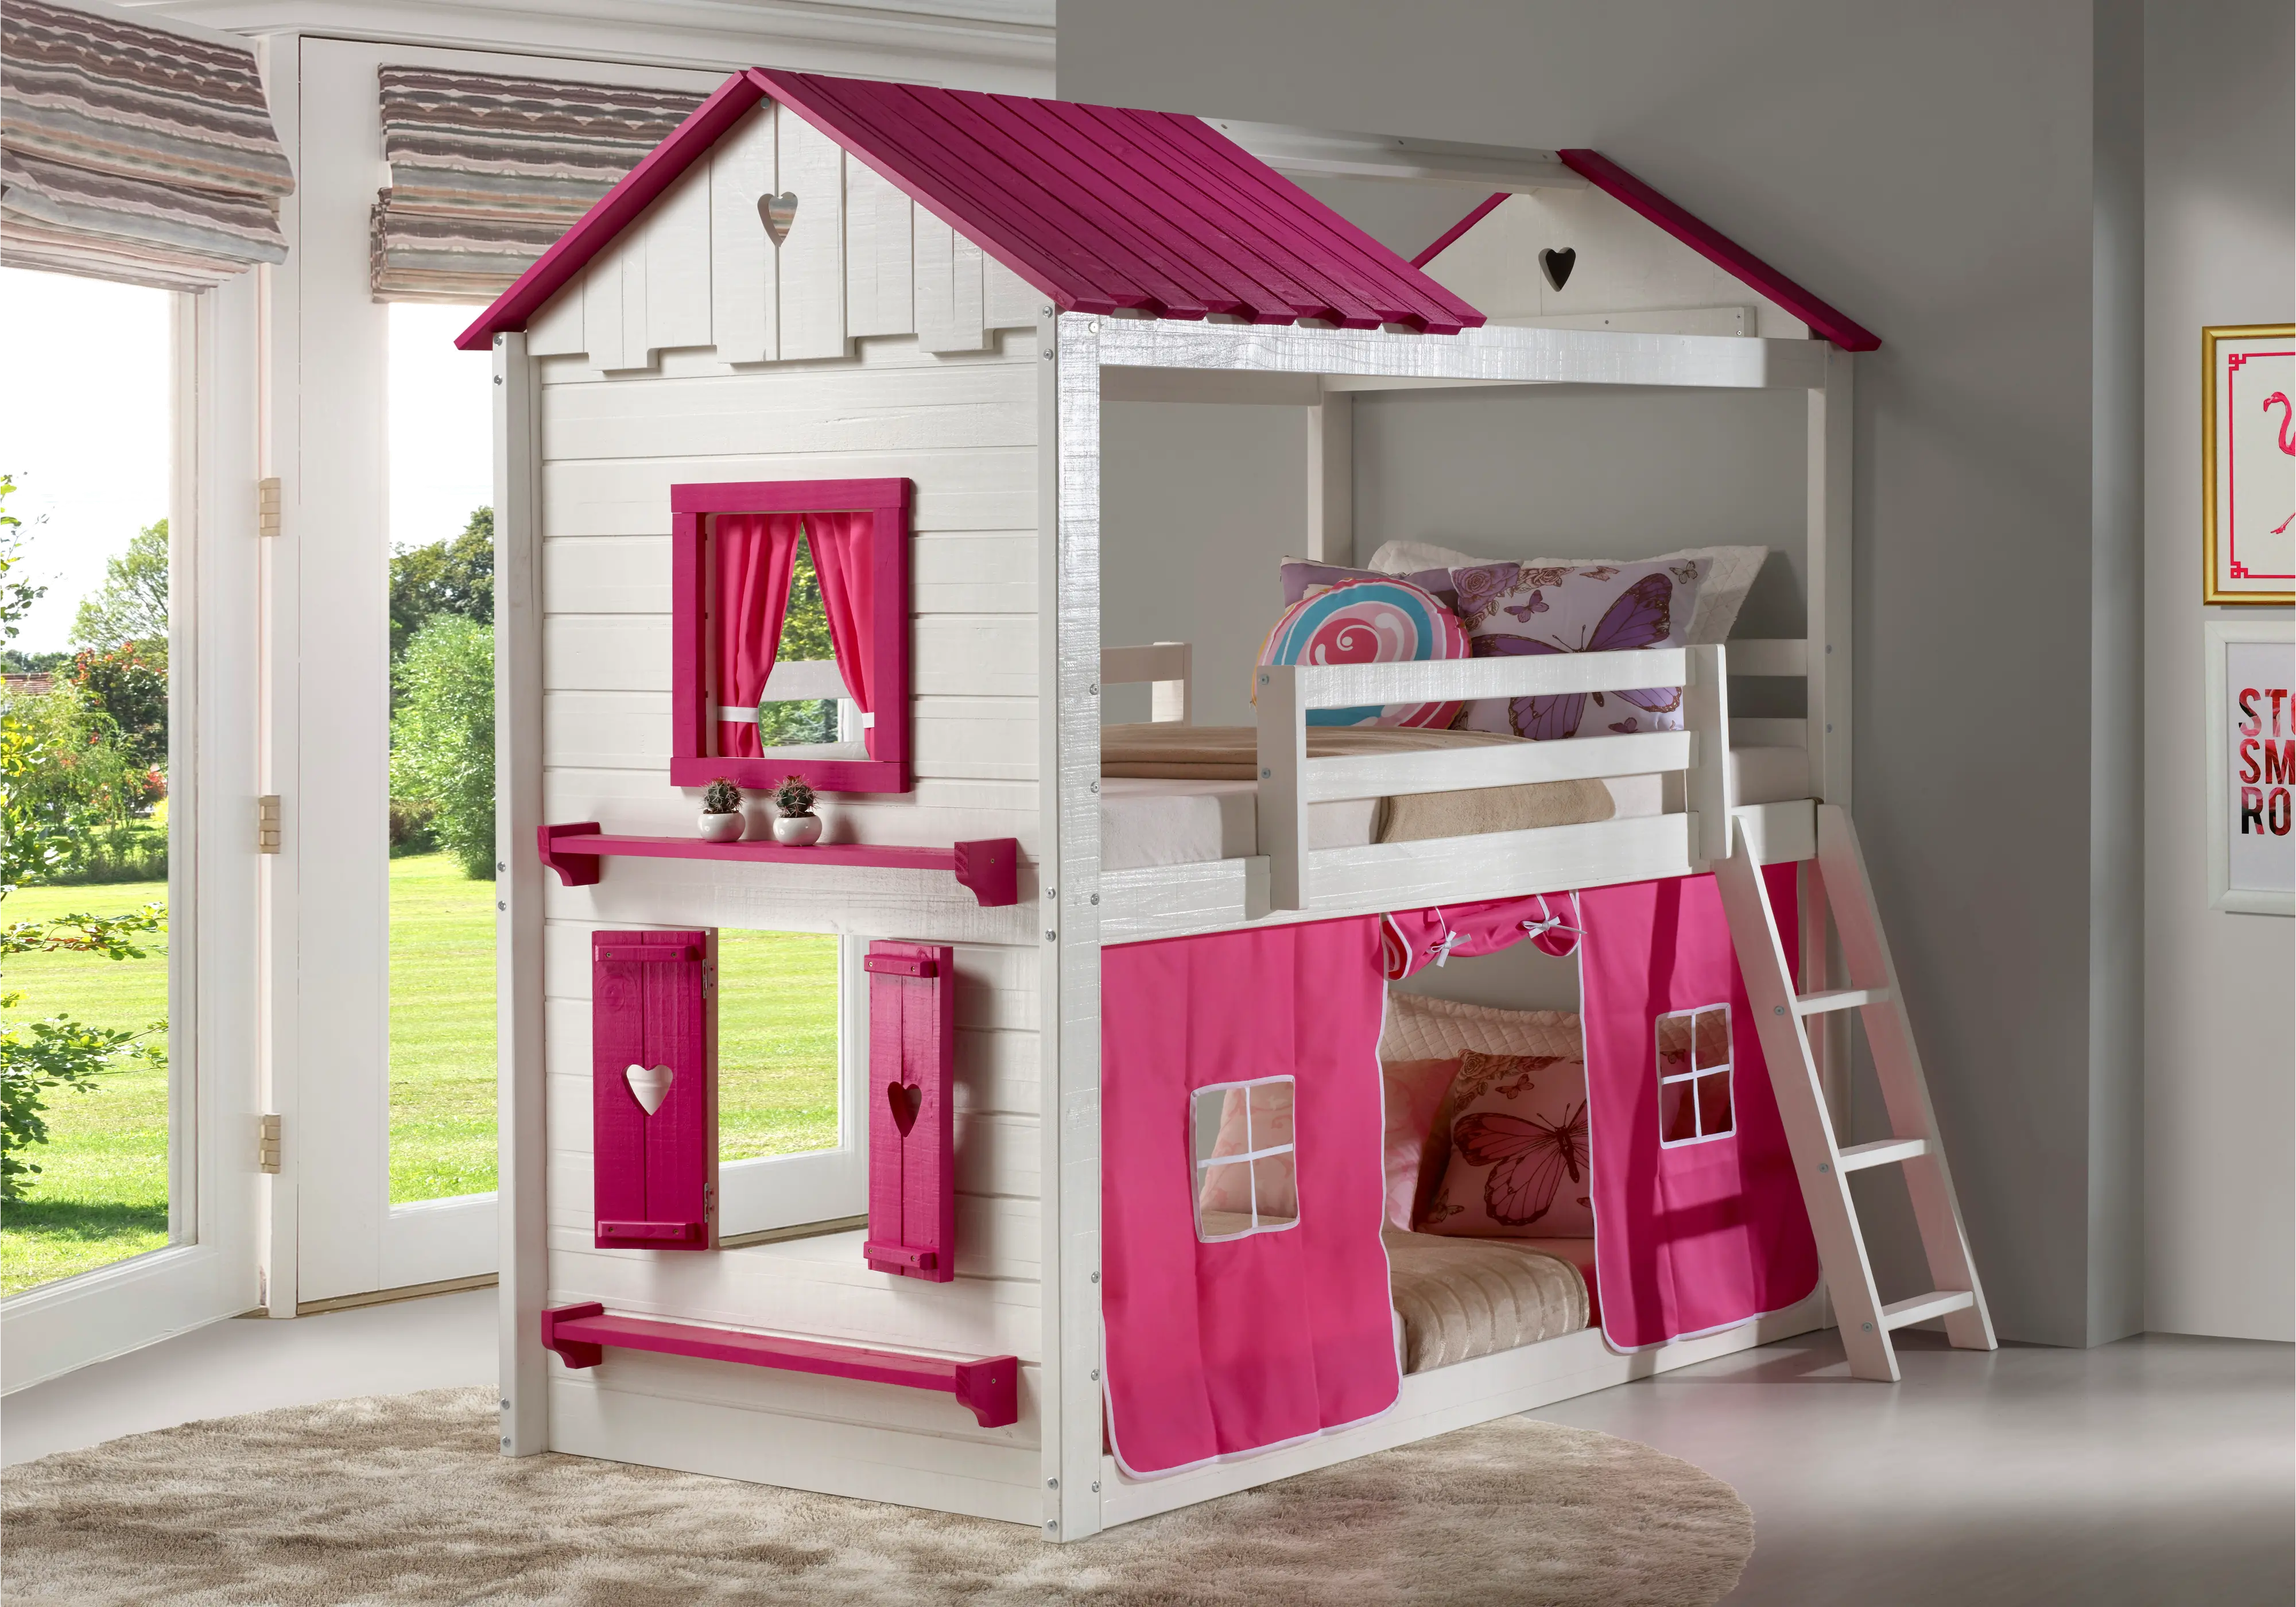 1570-TTWP1575-TP White and Pink Twin over Twin Bunk Bed with Tent - sku 1570-TTWP1575-TP